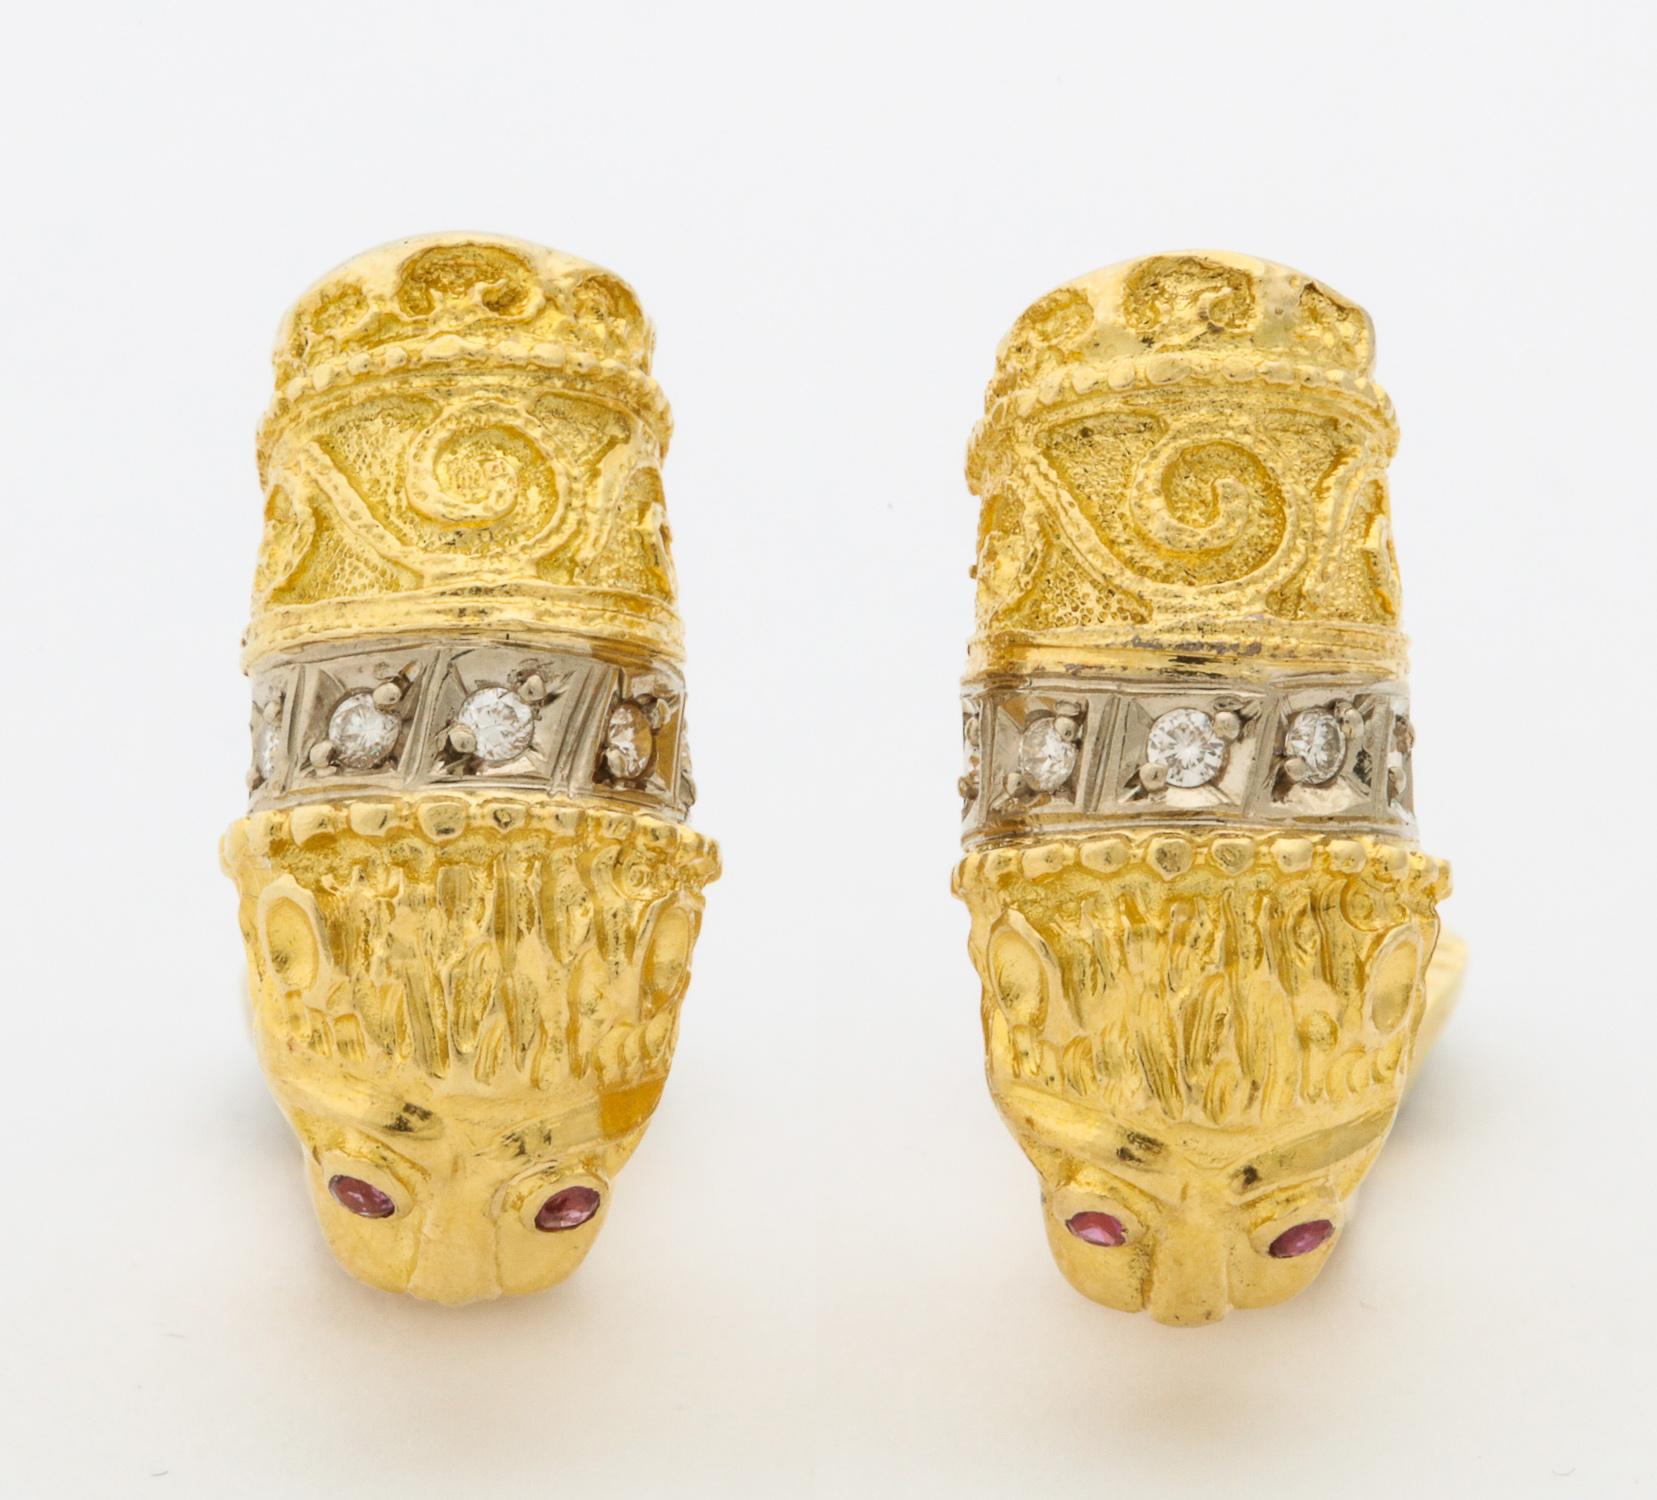 One Pair Of Ladies 18kt Textured Yellow Gold Earclips With Posts,Designed In A Figural Lion Motif And Embellished With 10 Full Cut Diamonds Weighing Approximately .30 cts Total Weight. Lion Earrings Are Also Embellished With 4 Faceted Rubies